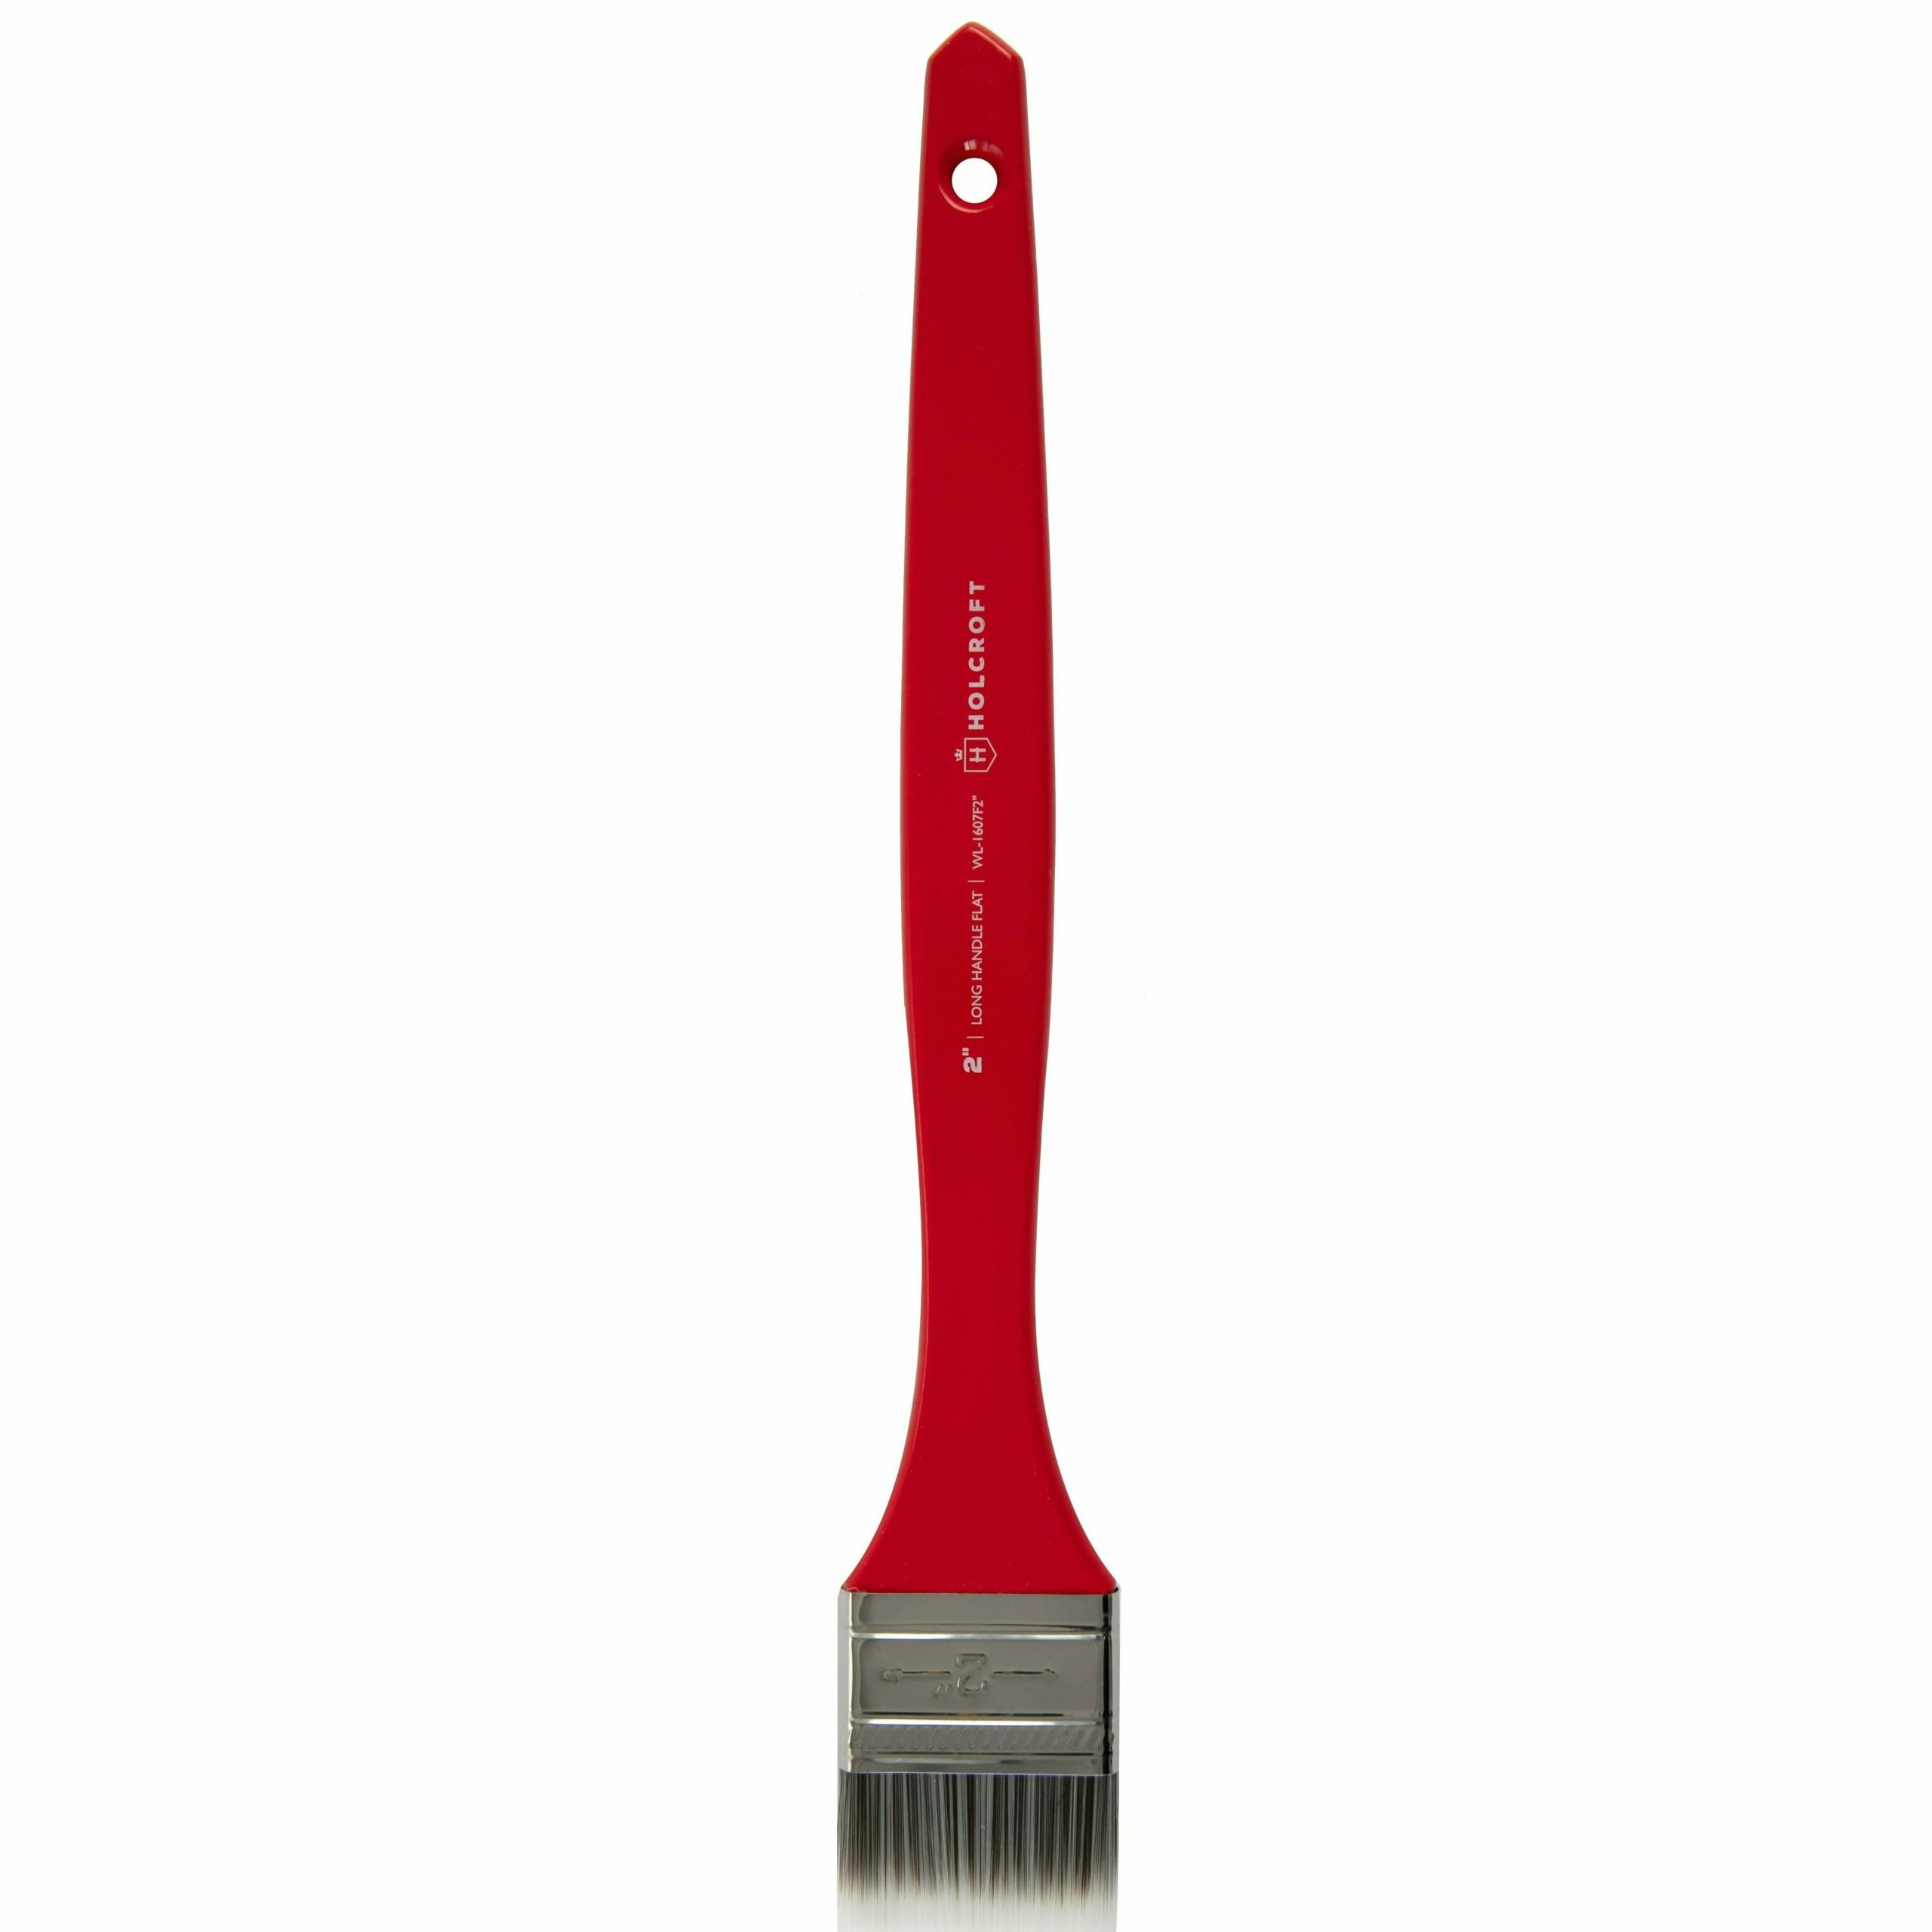 https://www.shopriot.shop/wp-content/uploads/1689/15/get-the-newest-holcroft-long-handle-flat-2inch-red-brush-637-for-less_0-scaled.jpg